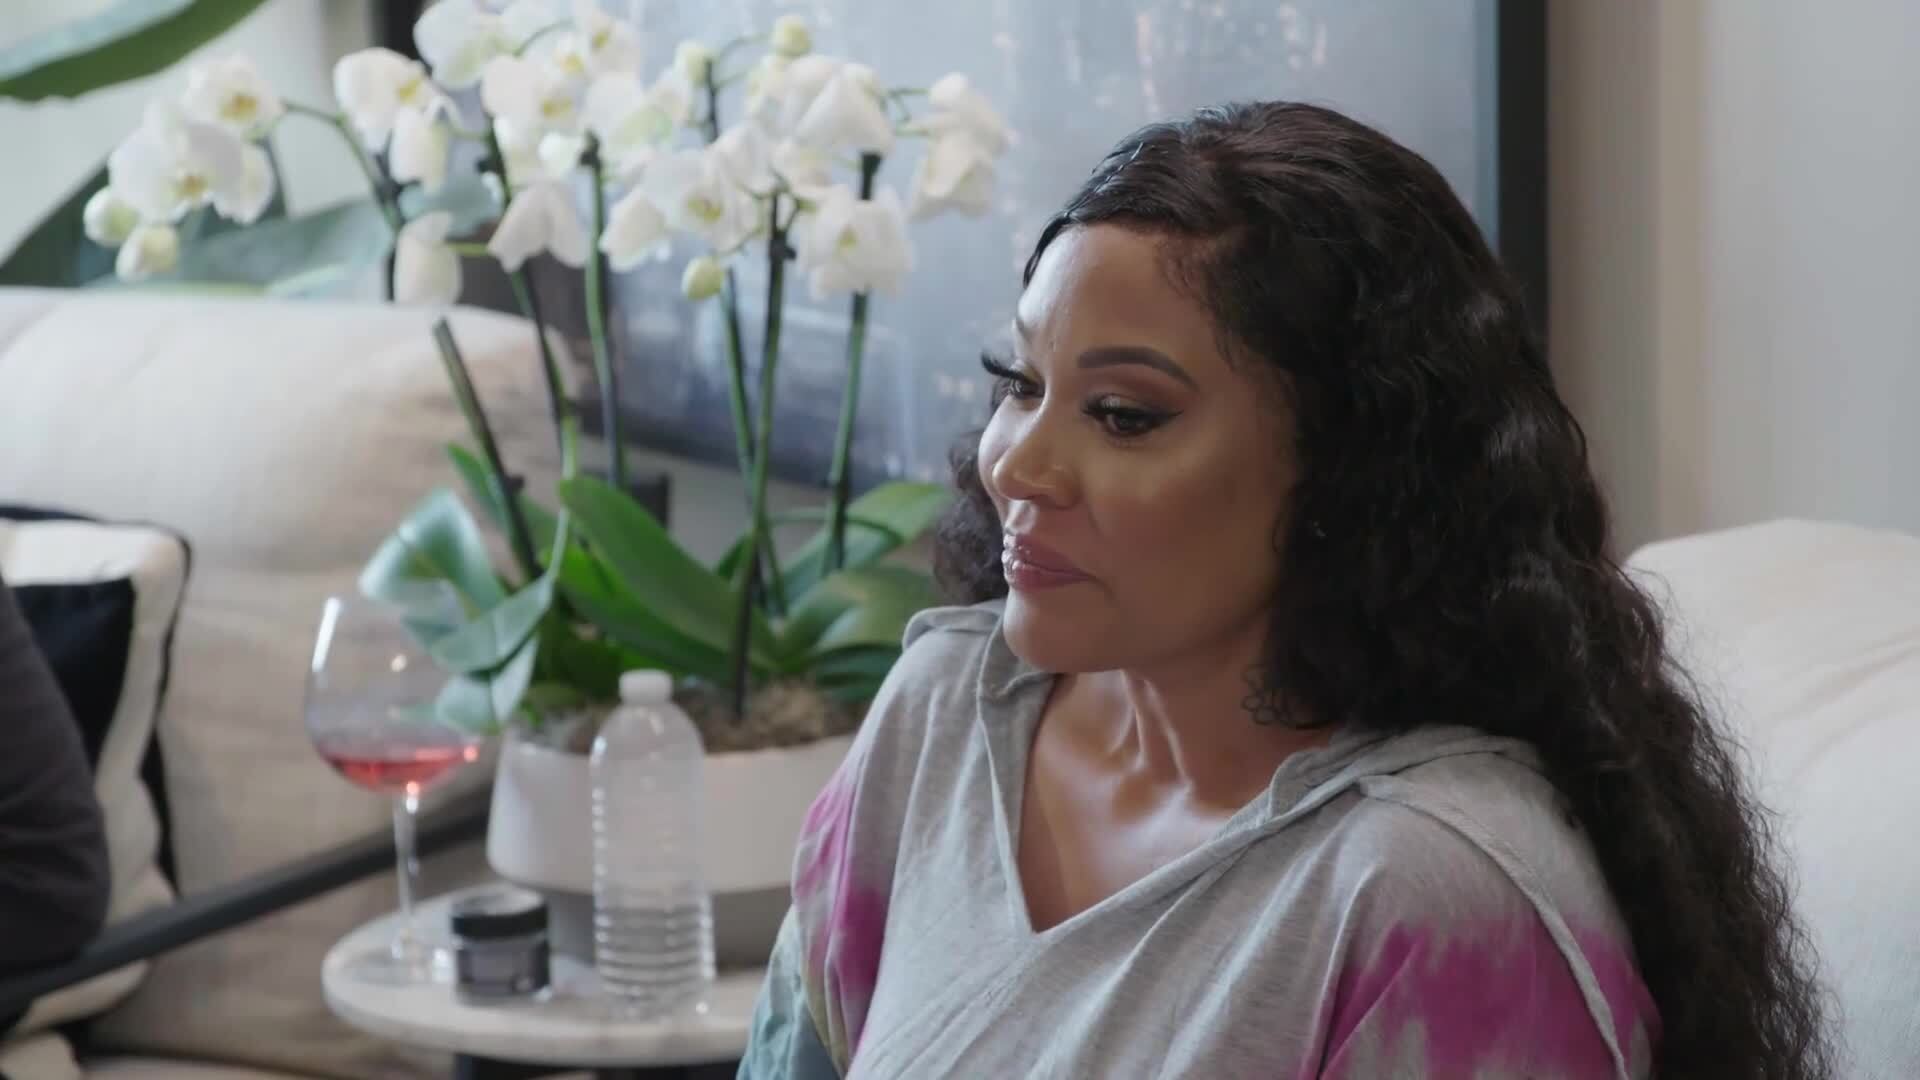 Watch Deleted Scene: K. Michelle & Lyrica Apologize! | Marriage Boot Camp: Hip Hop Edition Video Extras